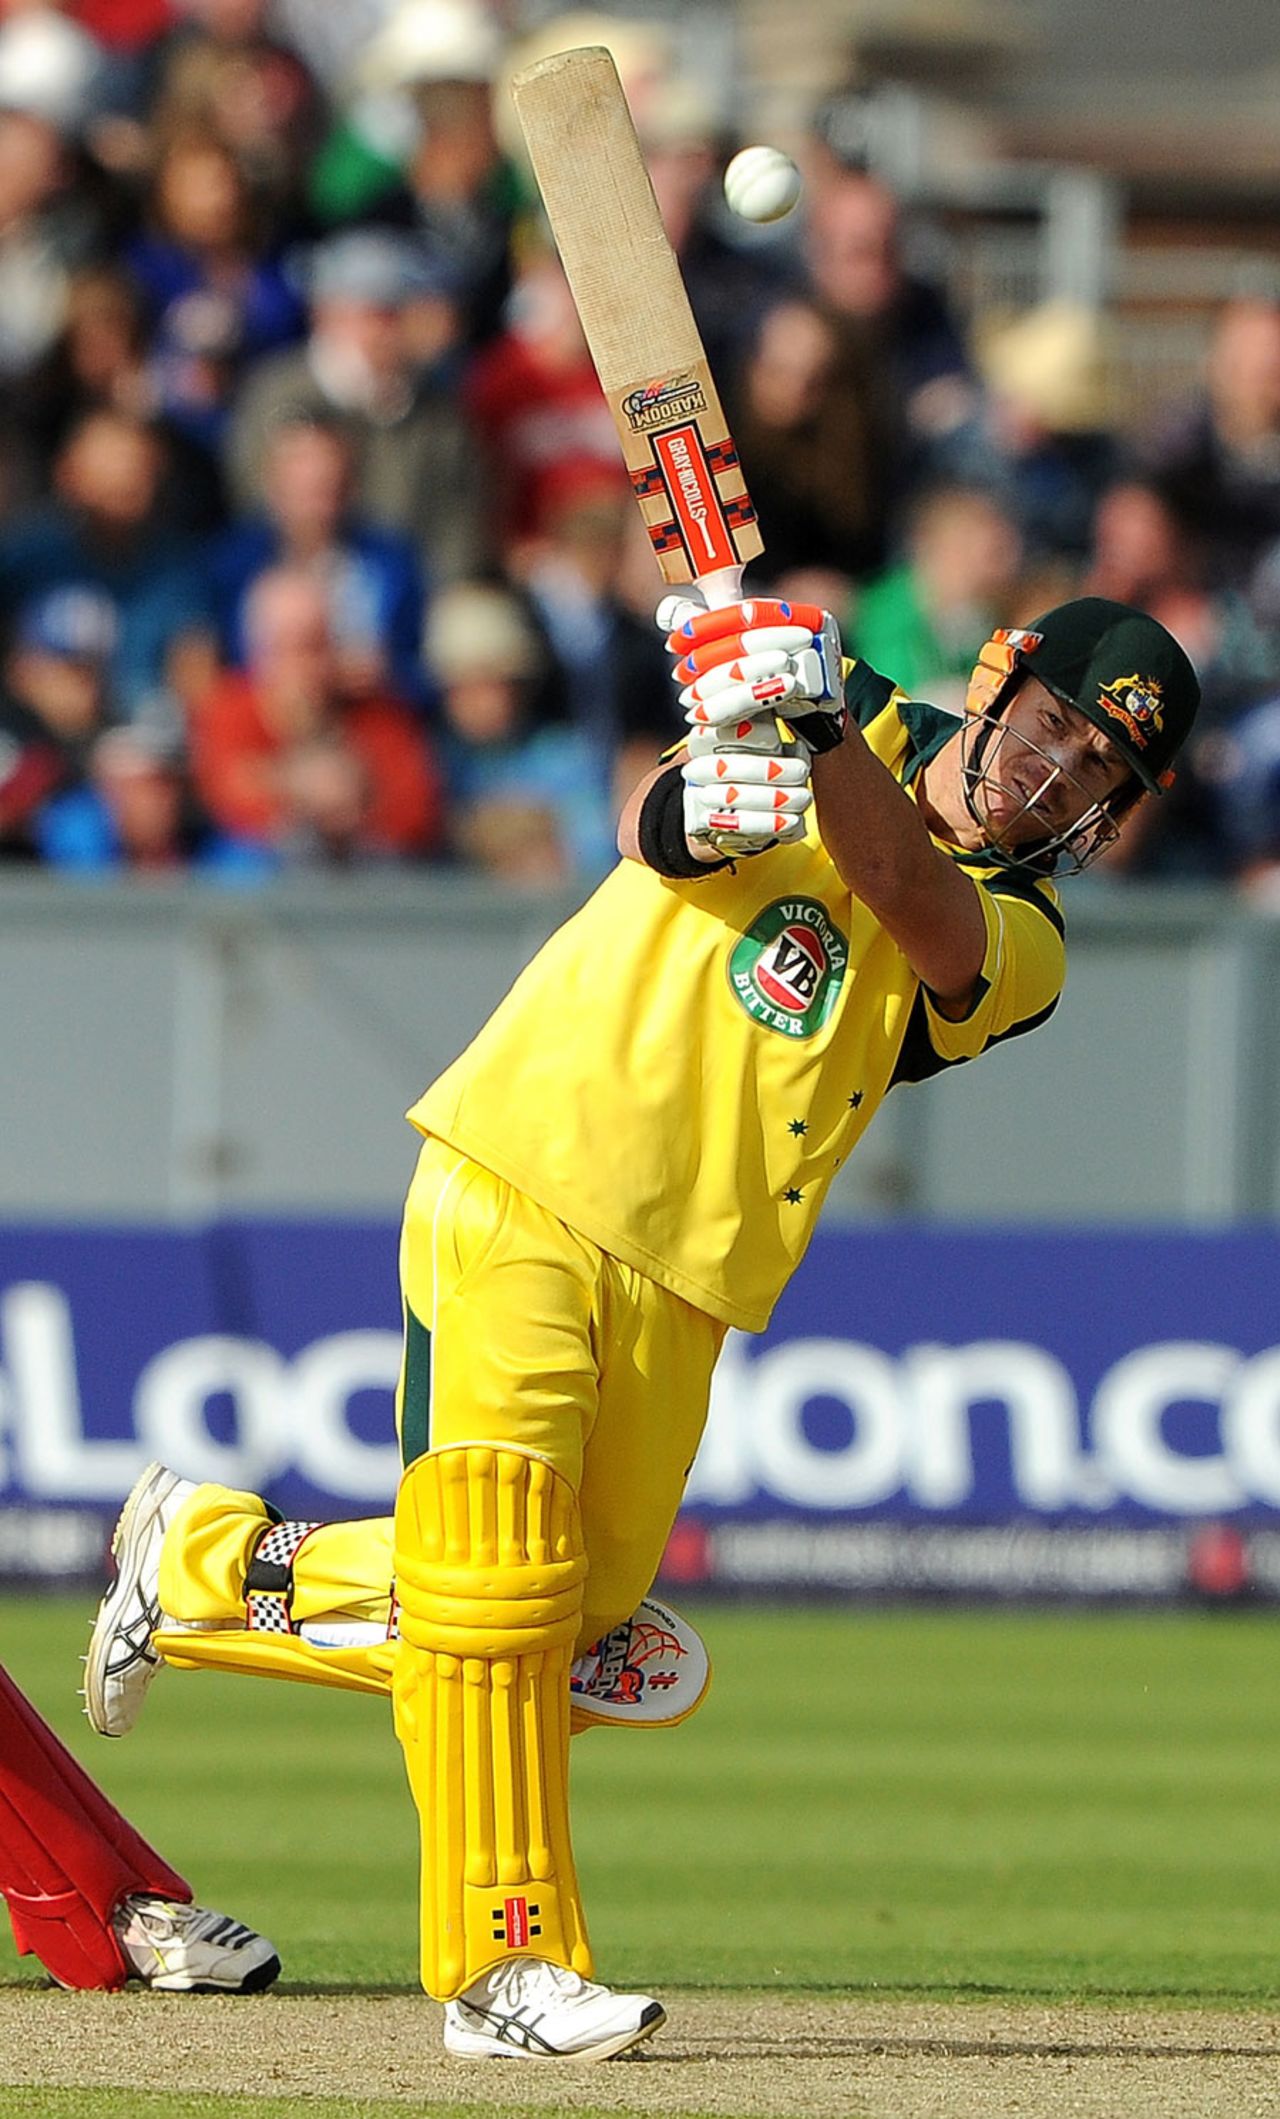 David Warner played aggressively for fifty, England v Australia, 2nd T20, Chester-le-Street, August 31, 2013